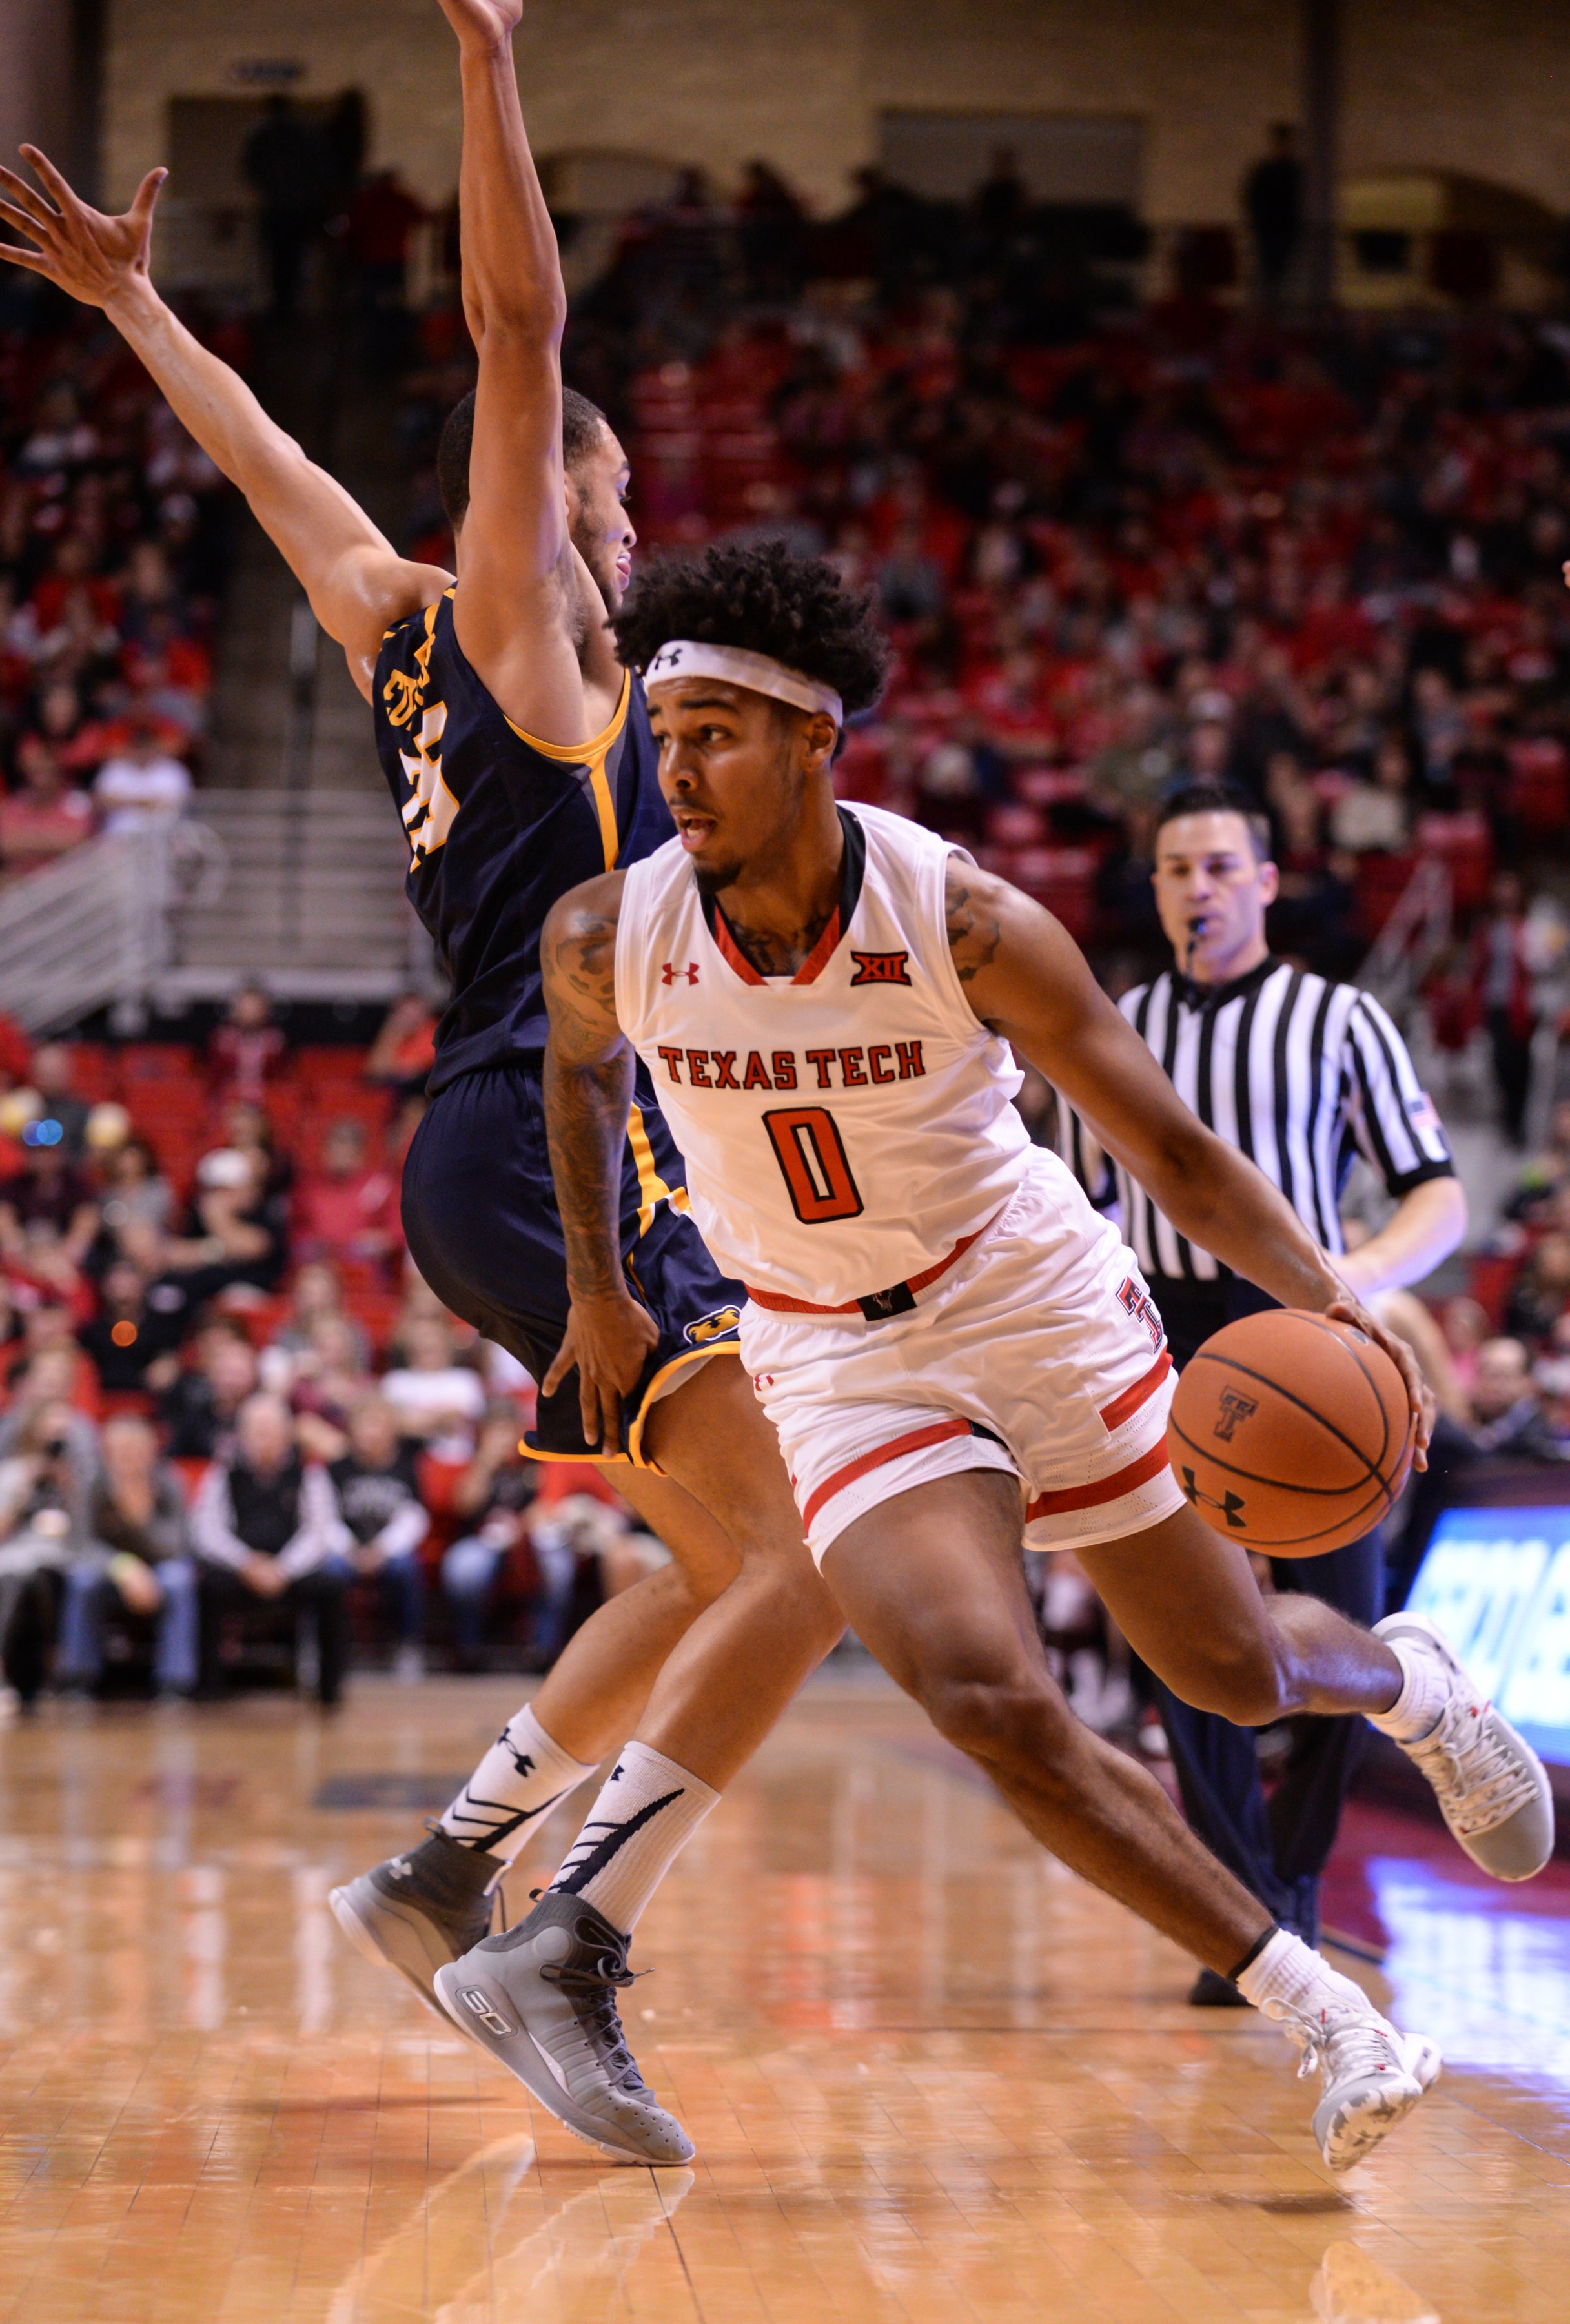  Texas Tech's Kyler Edwards (0) dribbles around UNC's Kai Edwards (25) during the game Saturday, Nov. 24, 2018 at United Supermarkets Arena in Lubbock, Texas. [Abbie Burnett/A-J Media] 